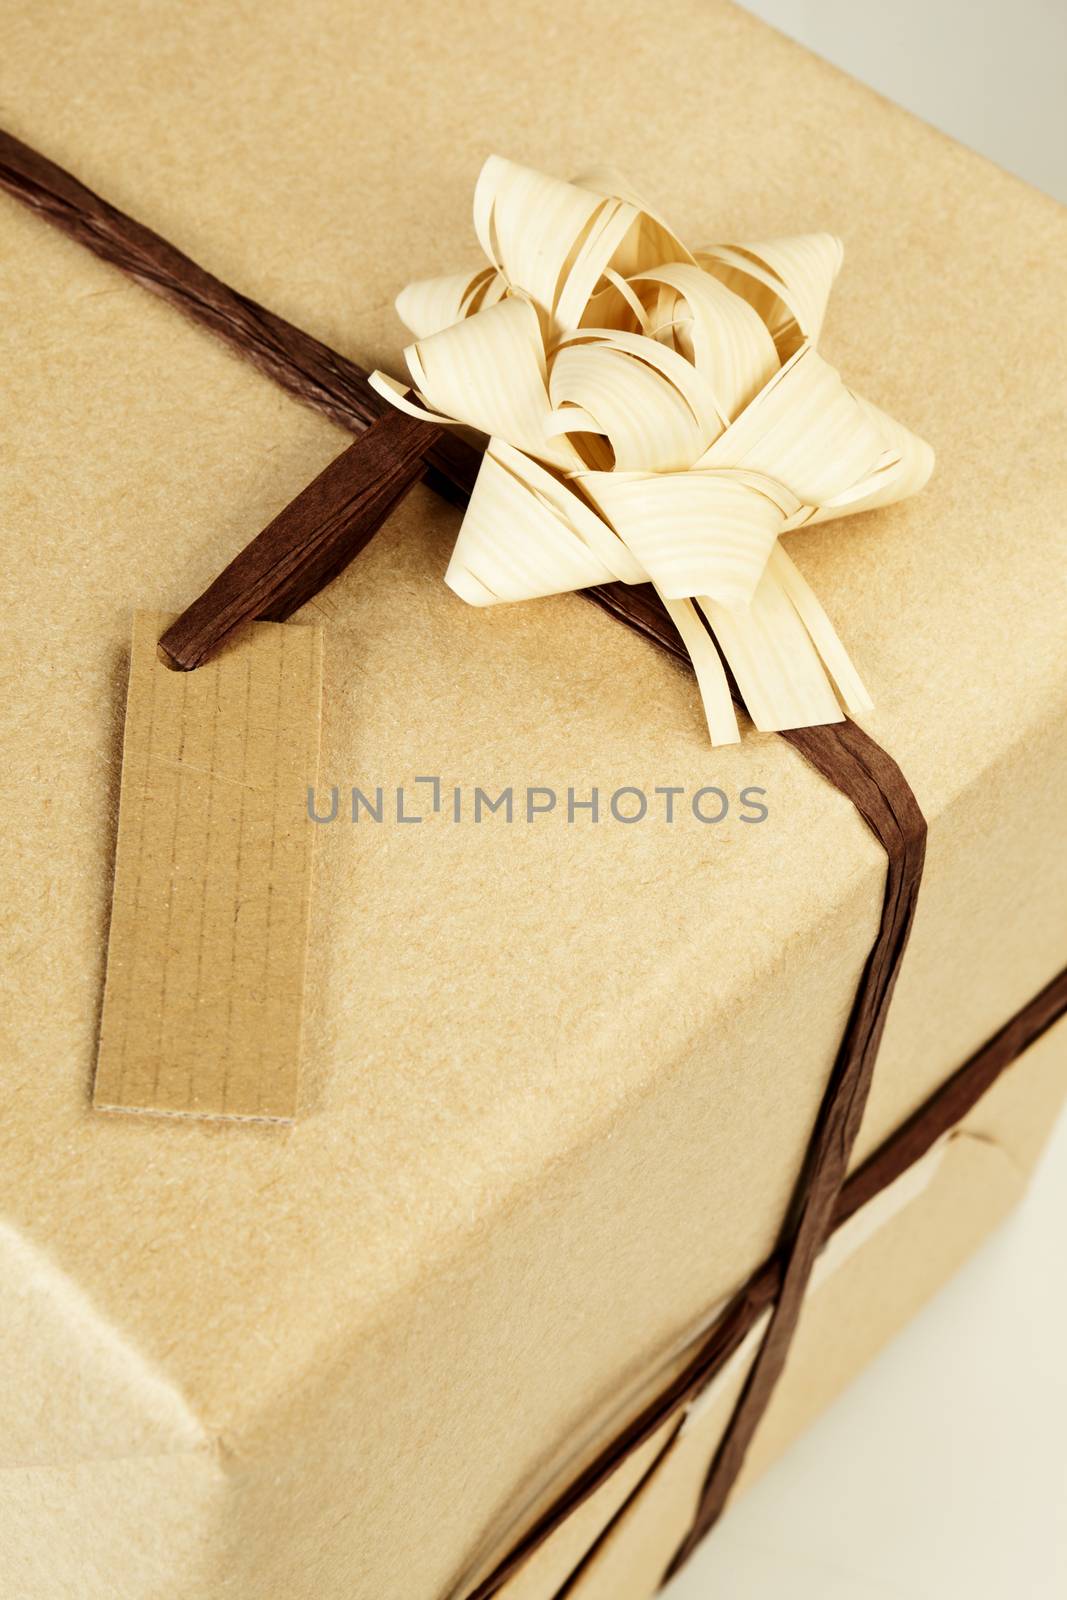 Beautifully naturally wrapped gift with label and copyspace.